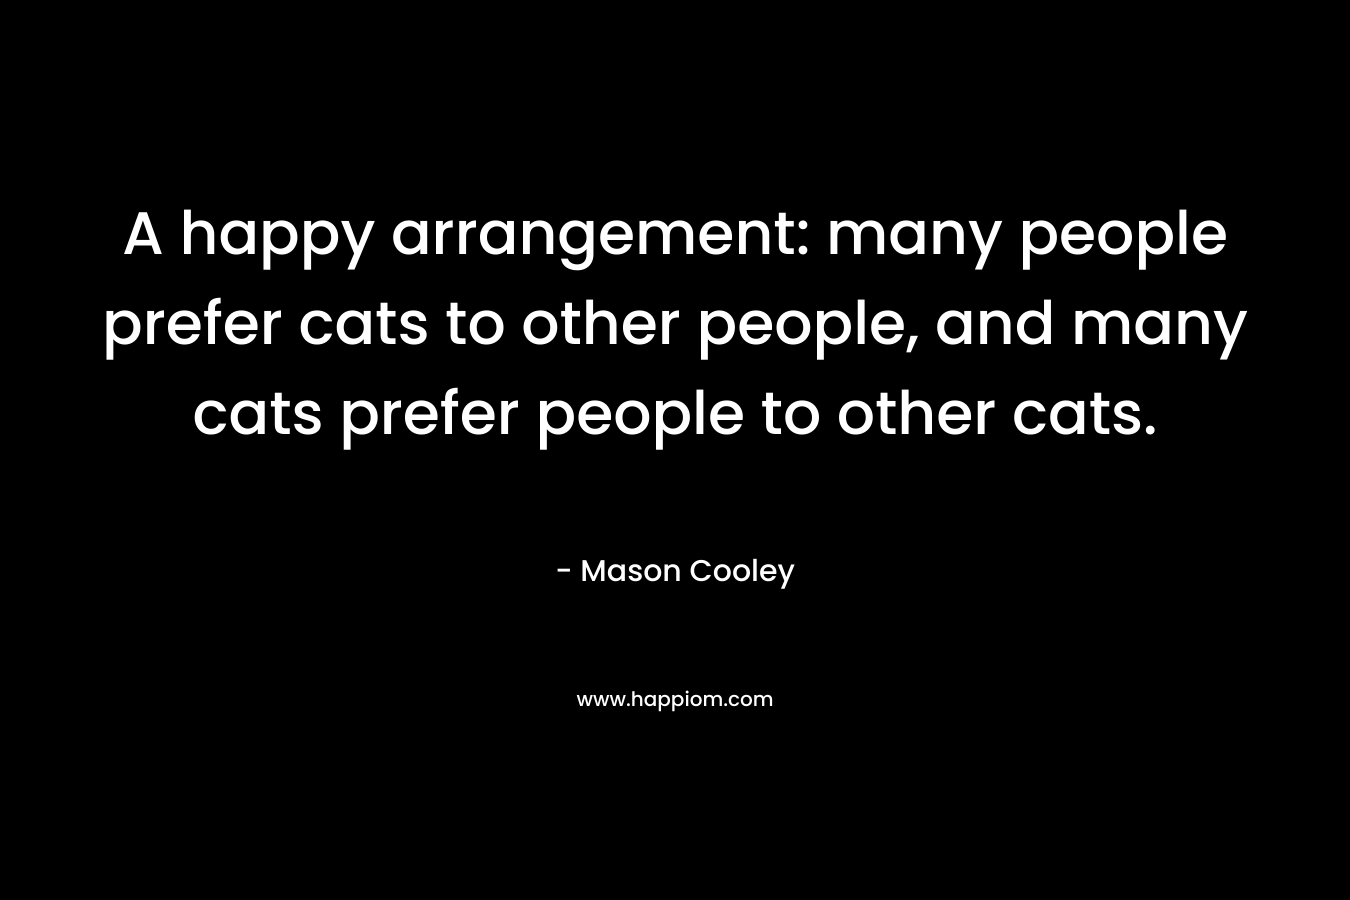 A happy arrangement: many people prefer cats to other people, and many cats prefer people to other cats.